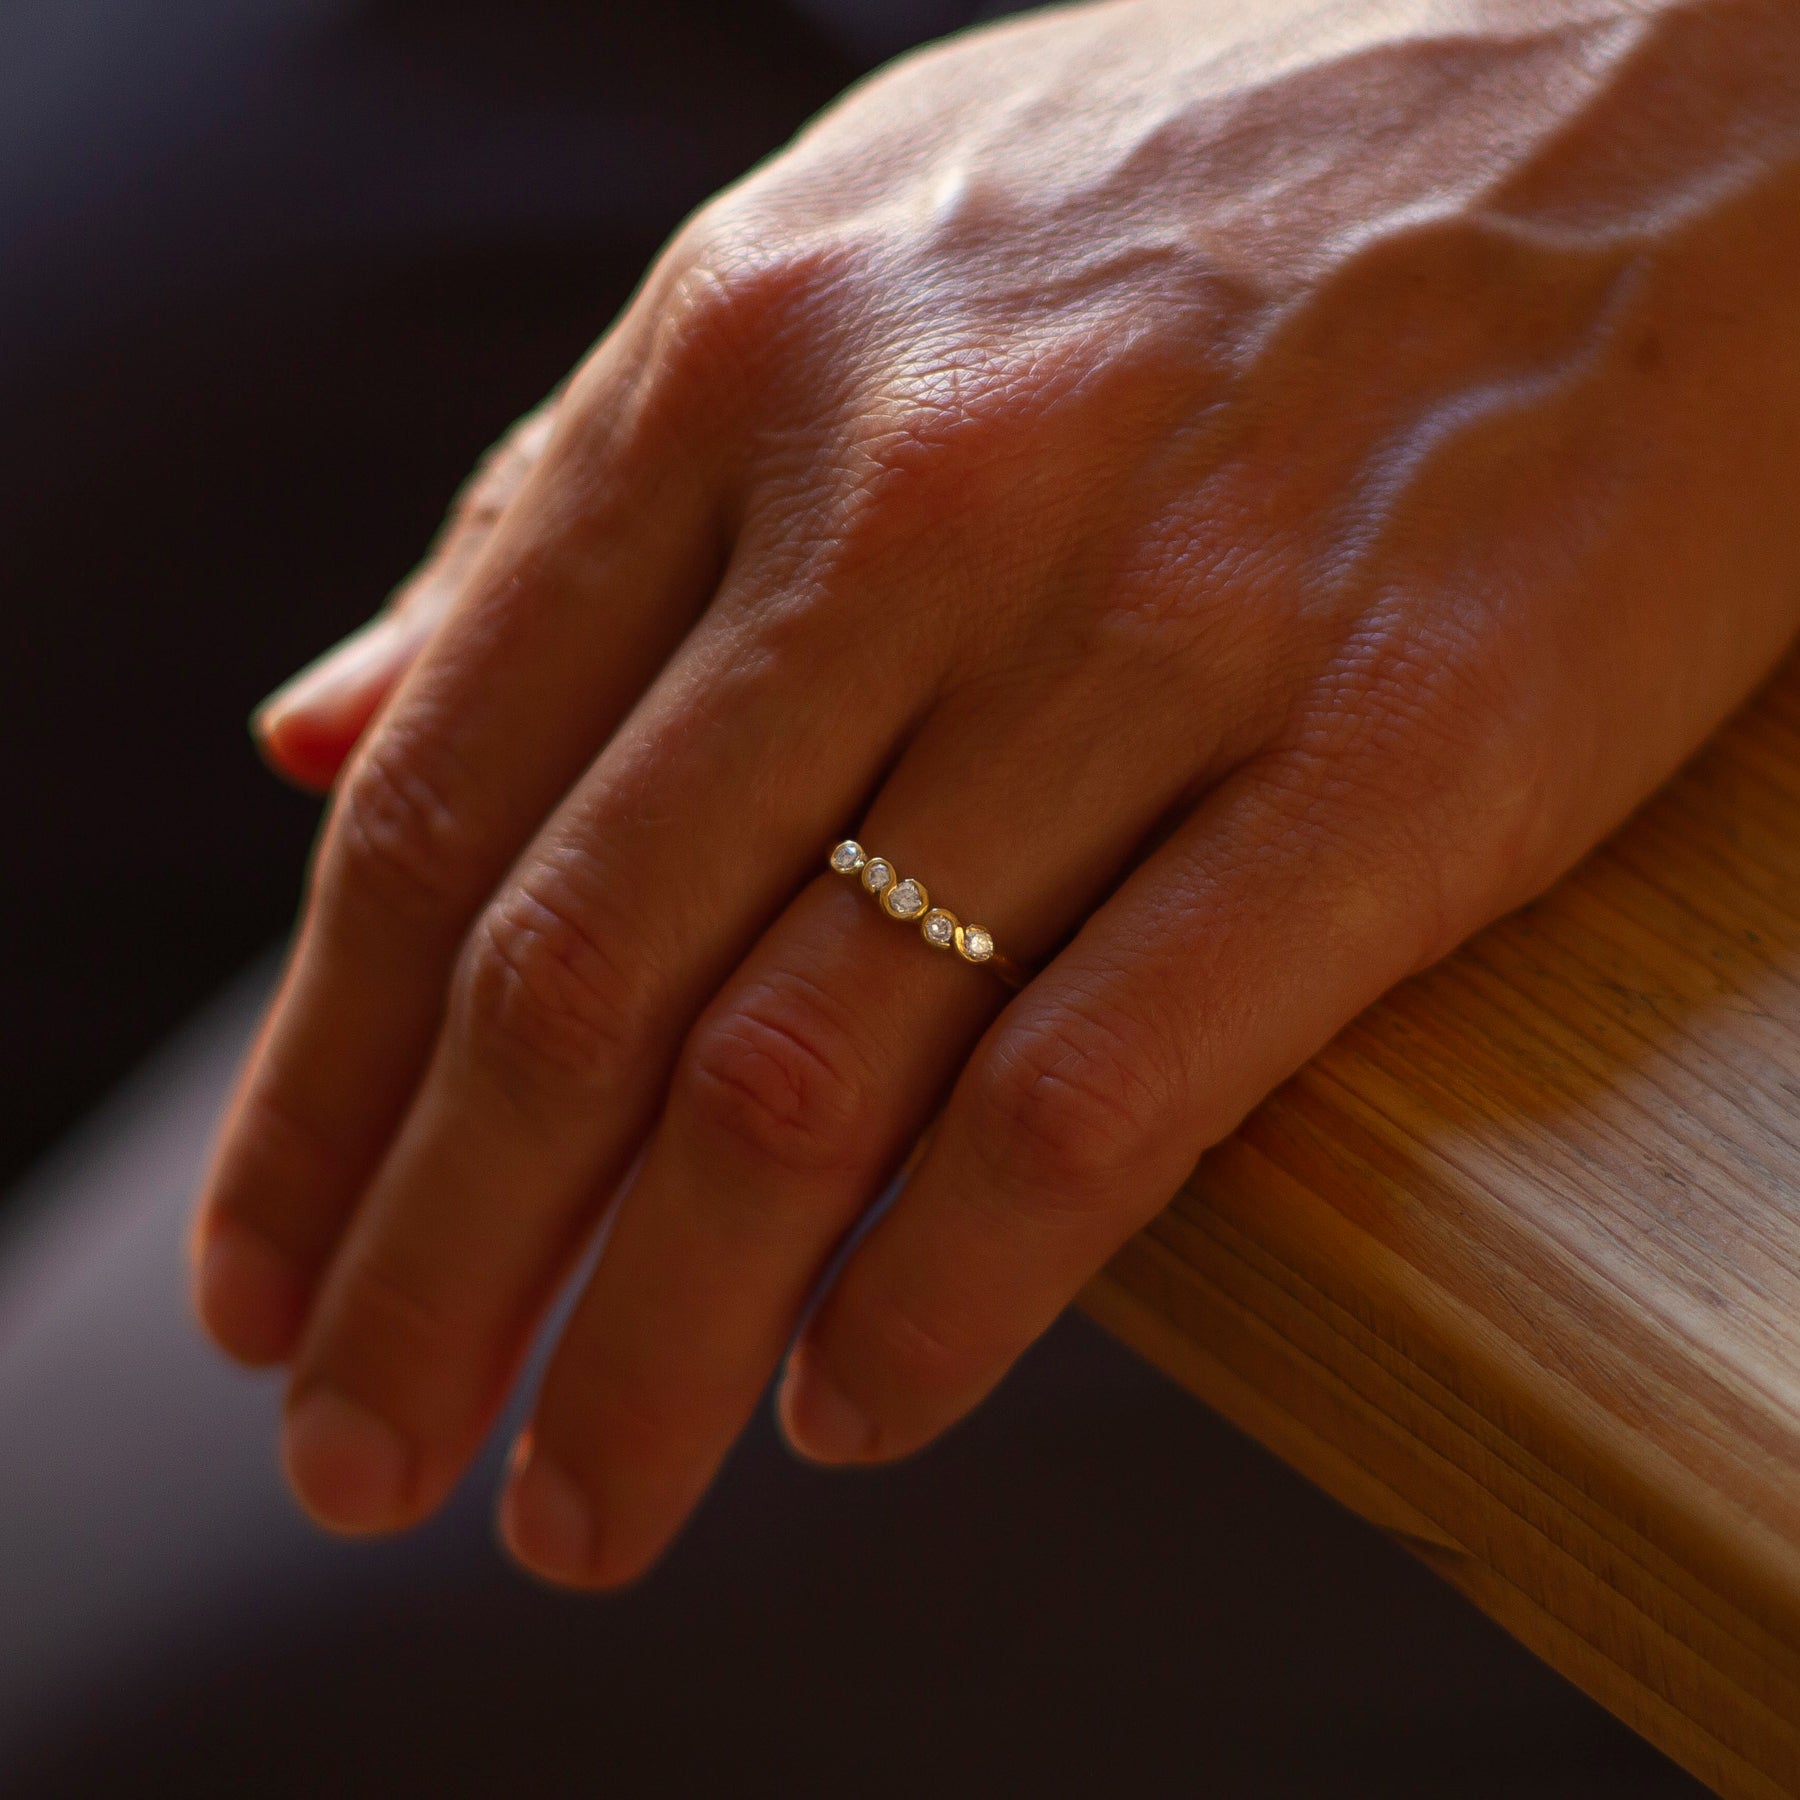 An 18ct gold and diamond engagement ring, handcrafted by Emily Nixon and photographed on a models hand.